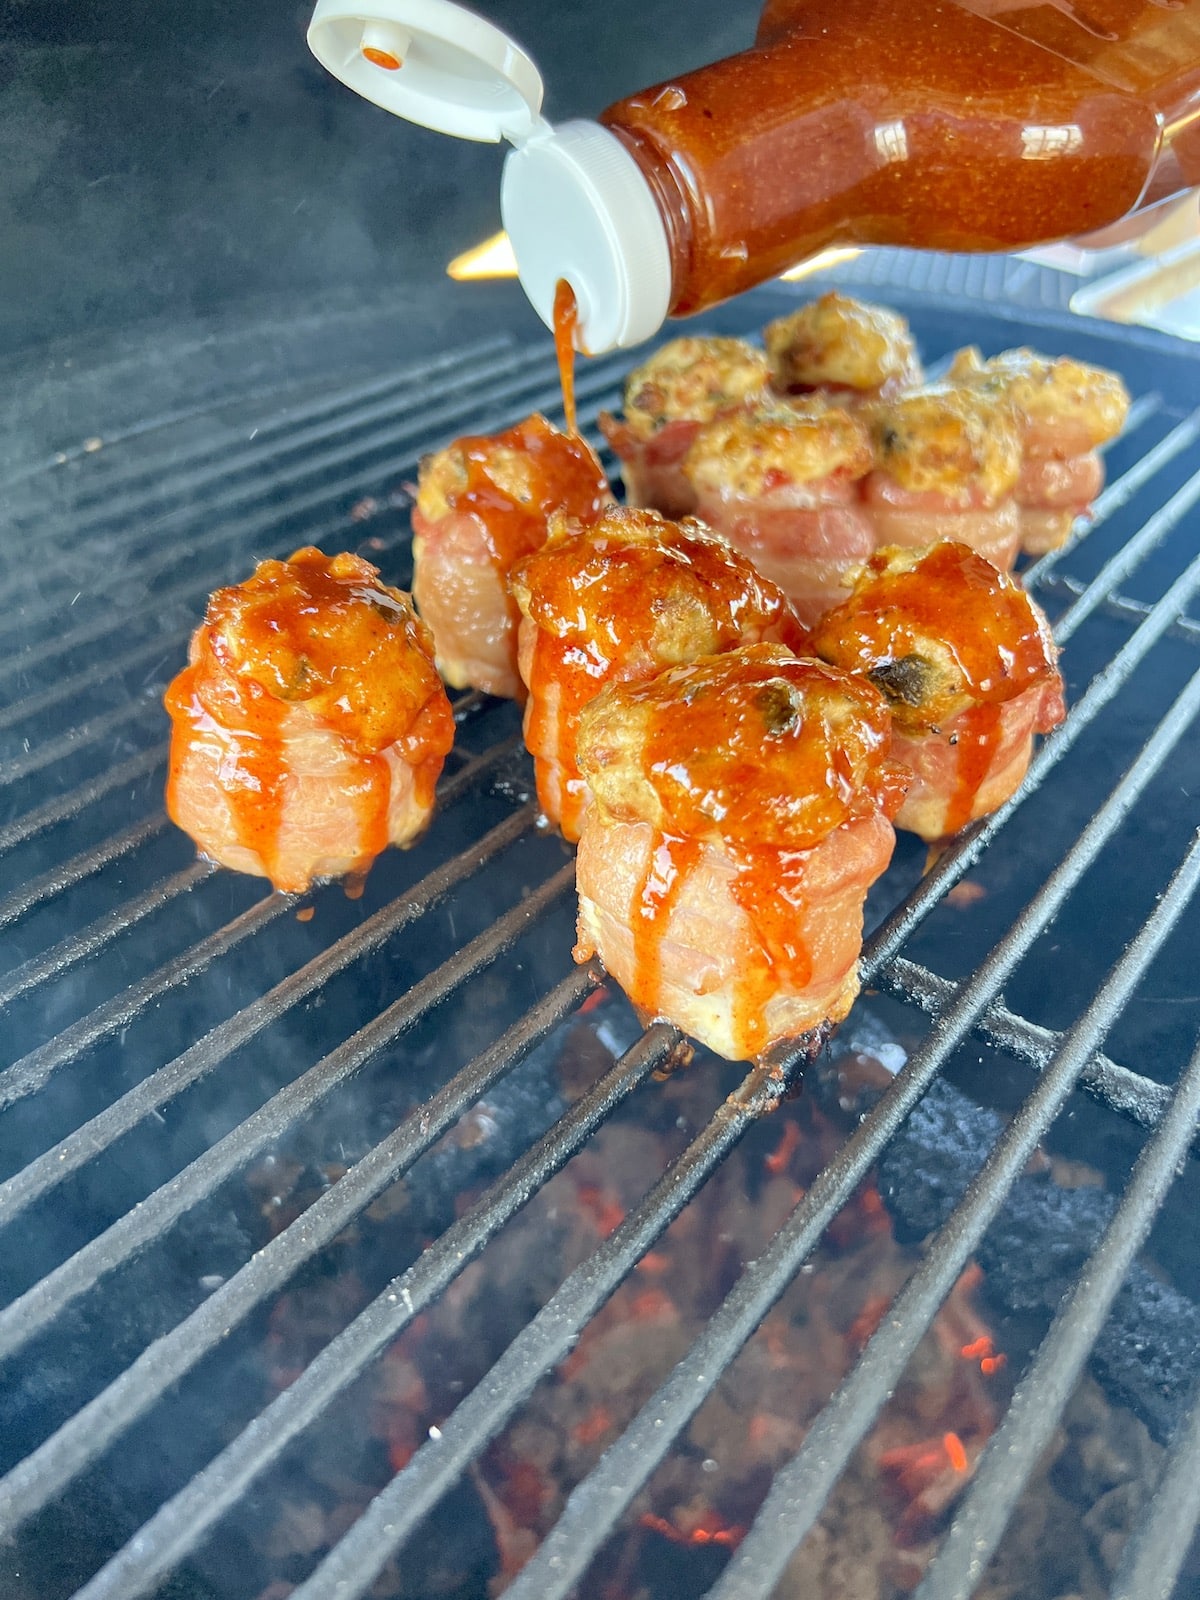 Drizzling peach bbq sauce over pig shots on a grill.